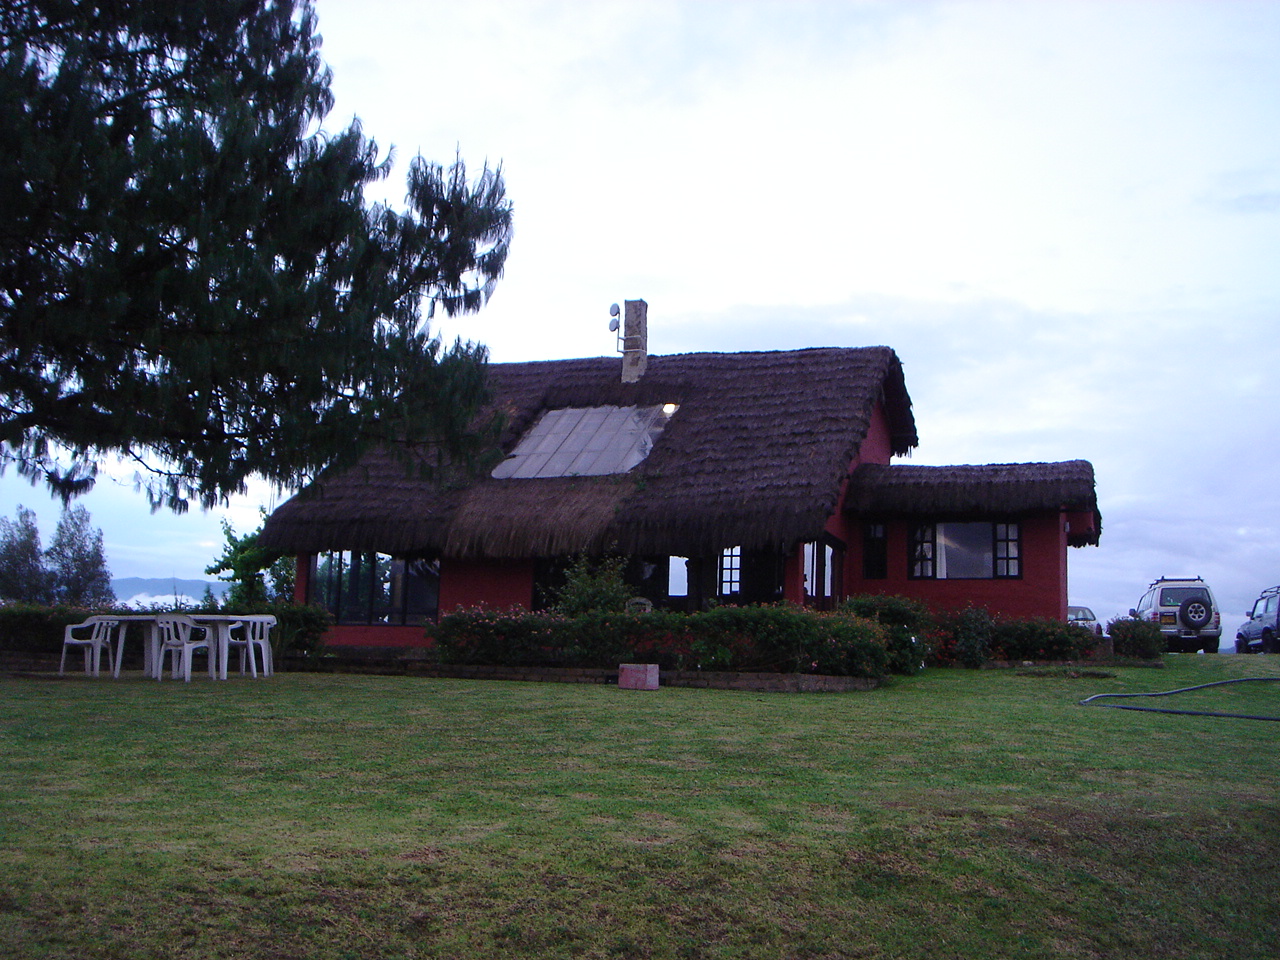 a house with a thatched roof and green lawn